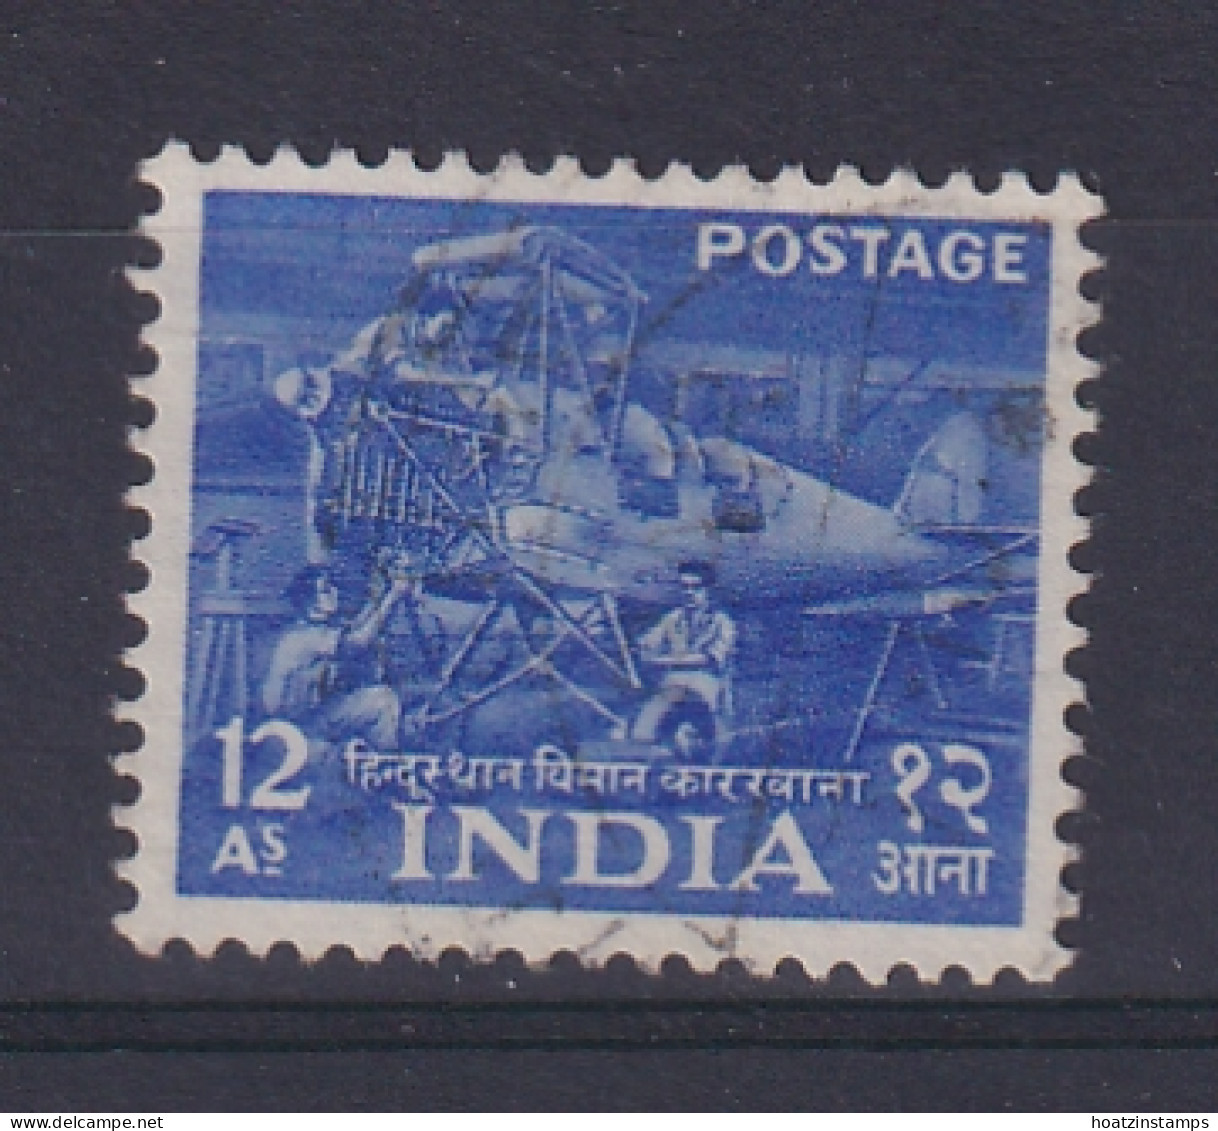 India: 1955   Five Year Plan    SG364    12a   Used - Oblitérés